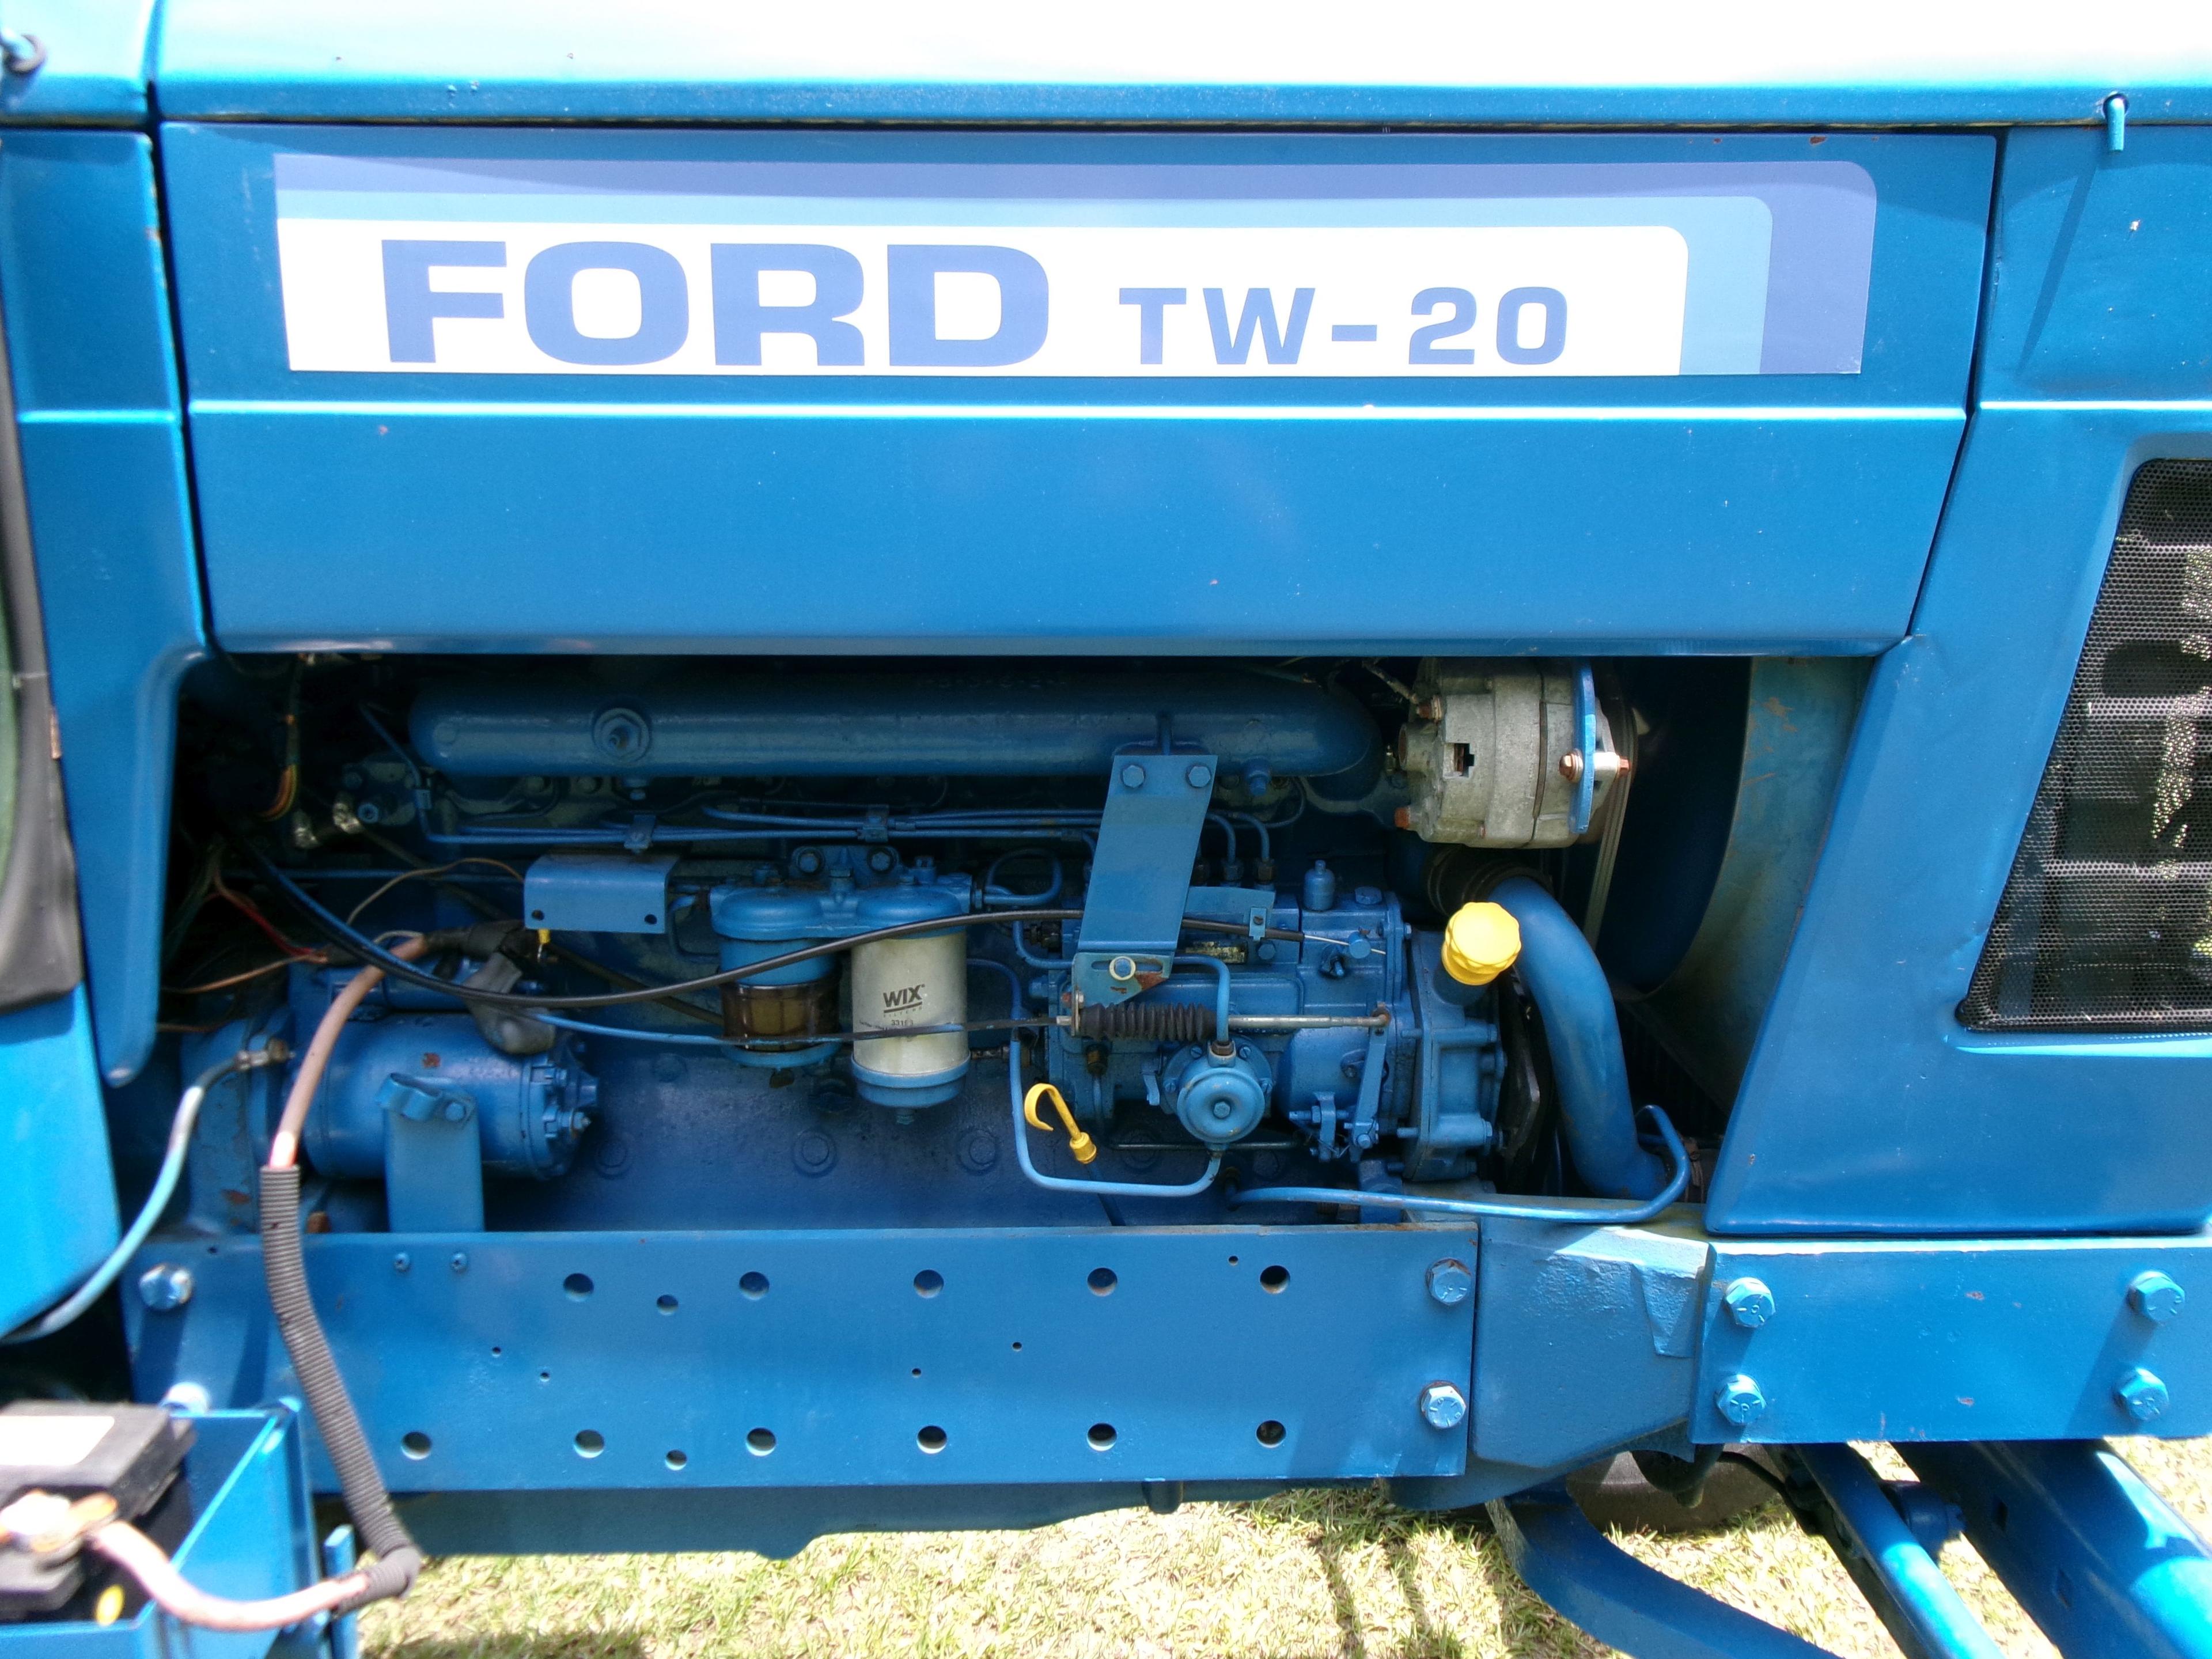 (9954)  FORD TW-20 TRACTOR